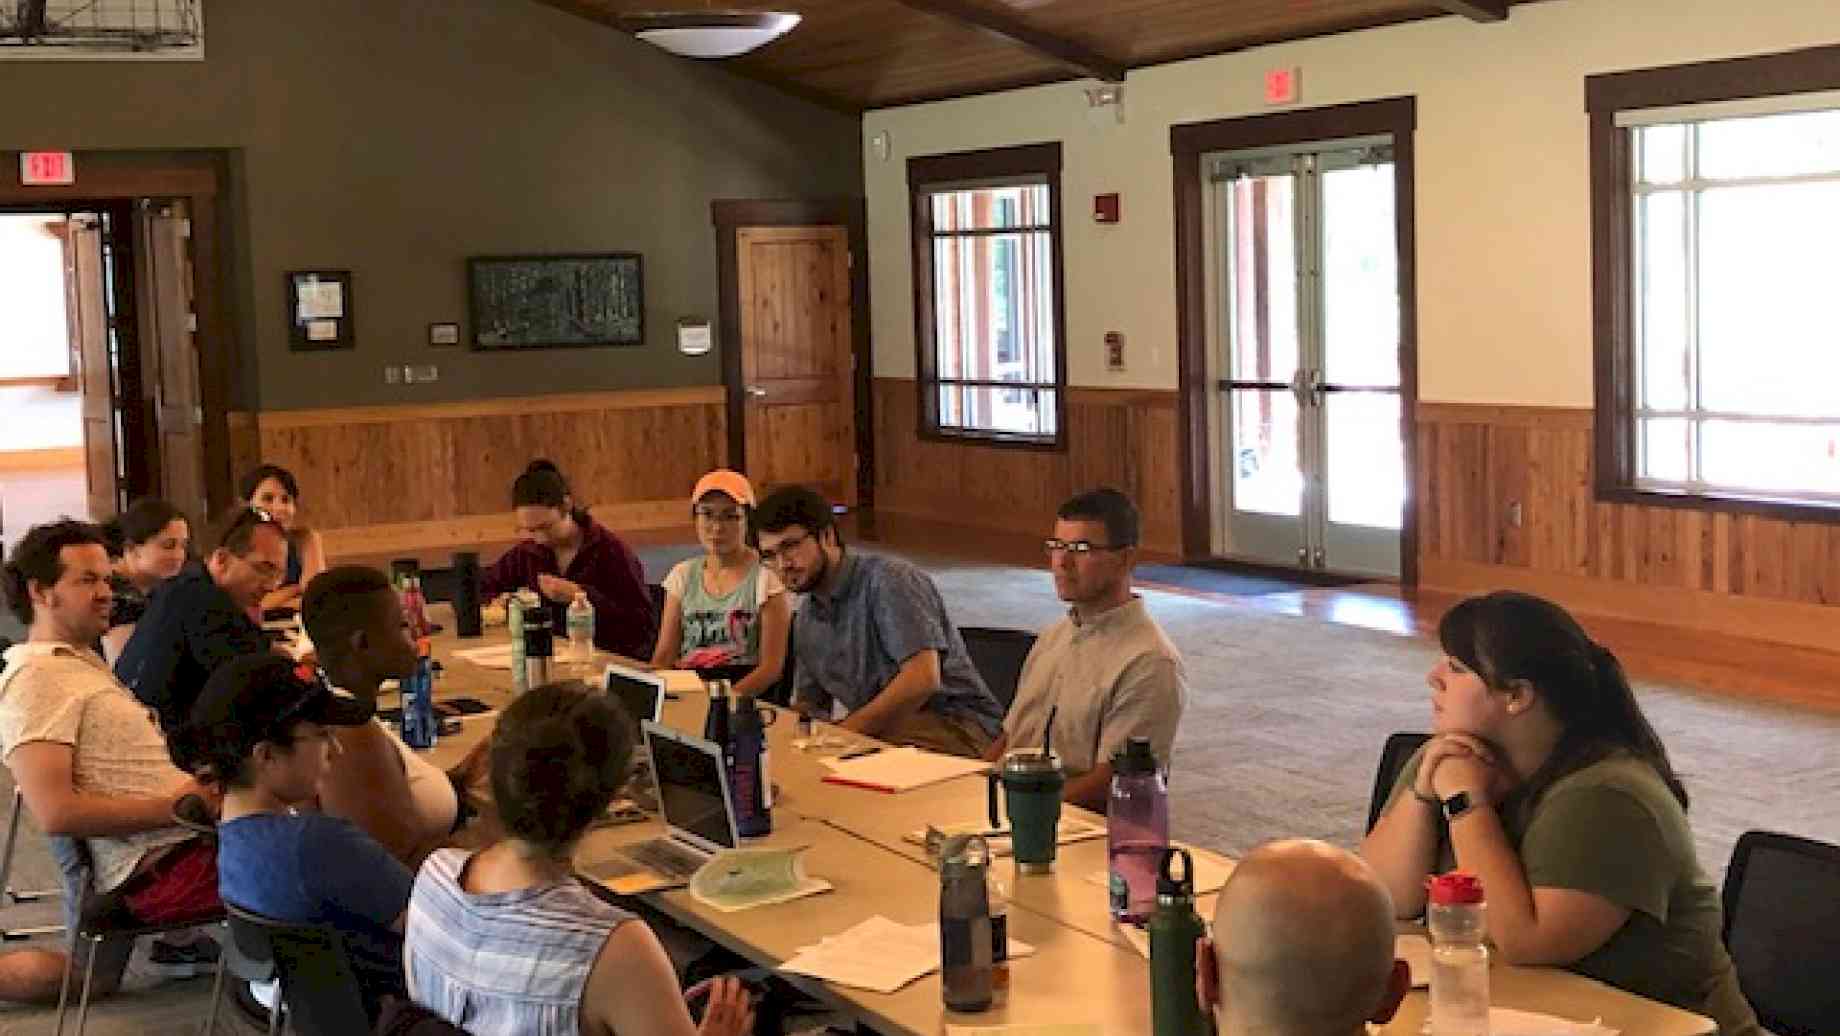 Musicology faculty and students discussing community during their retreat (Fall 2019)